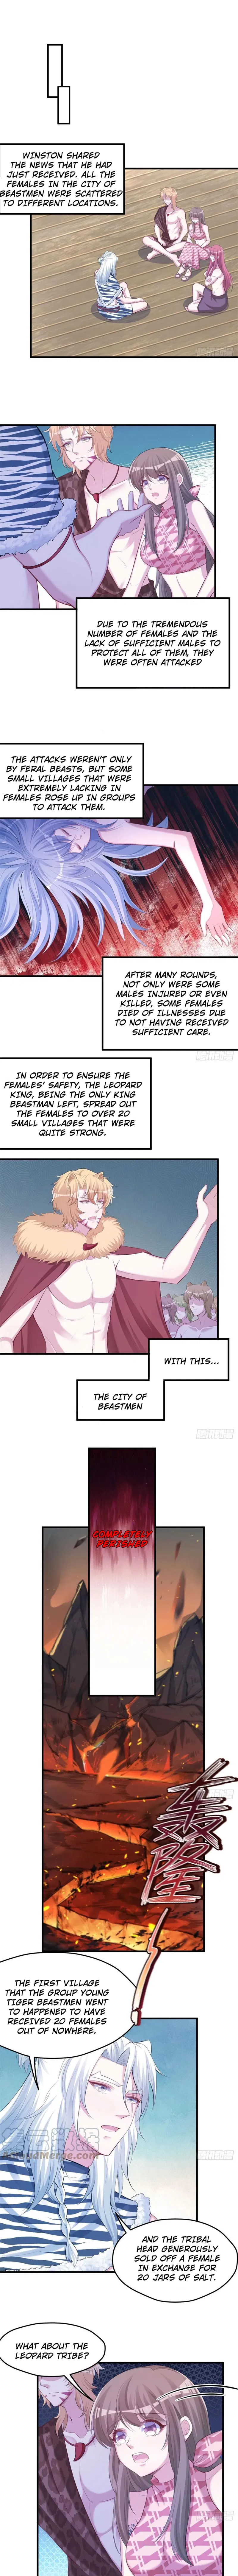 Beauty and the Beasts Chapter 305 page 2